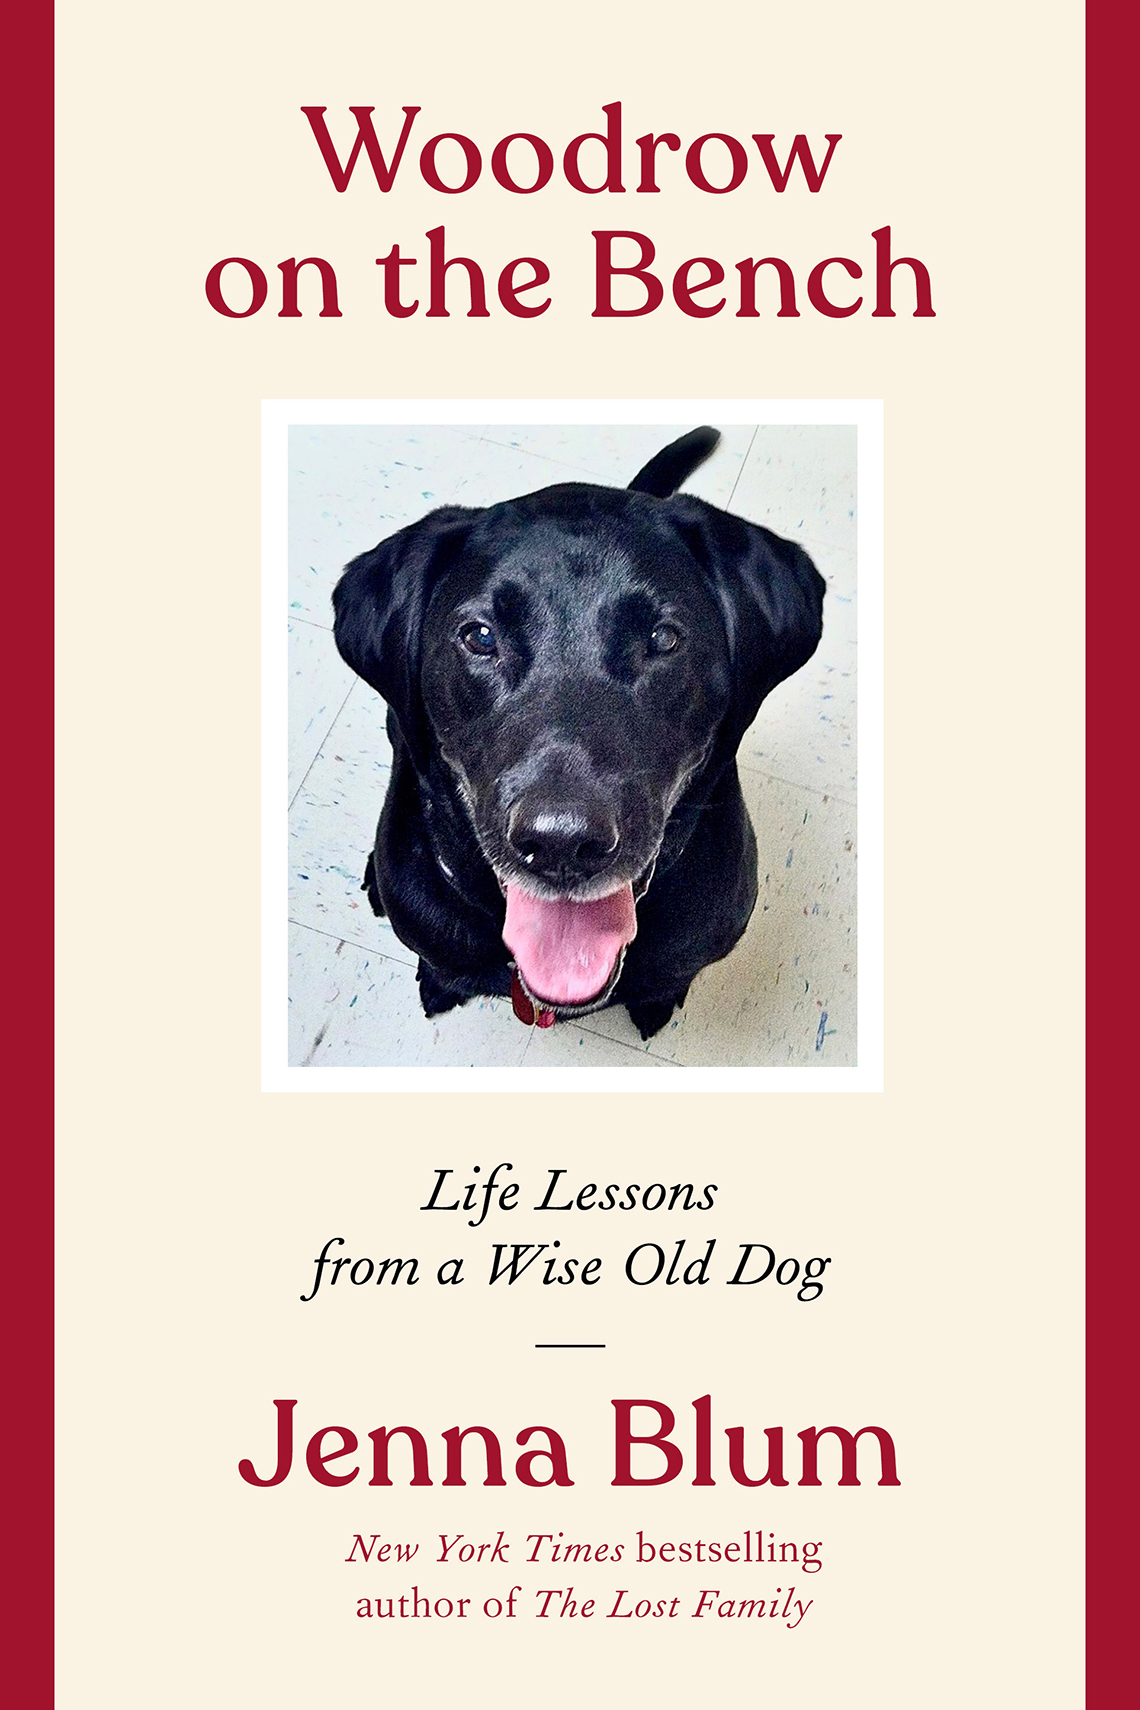 woodrow on the bench life lessons from a wise old dog by jenna blum